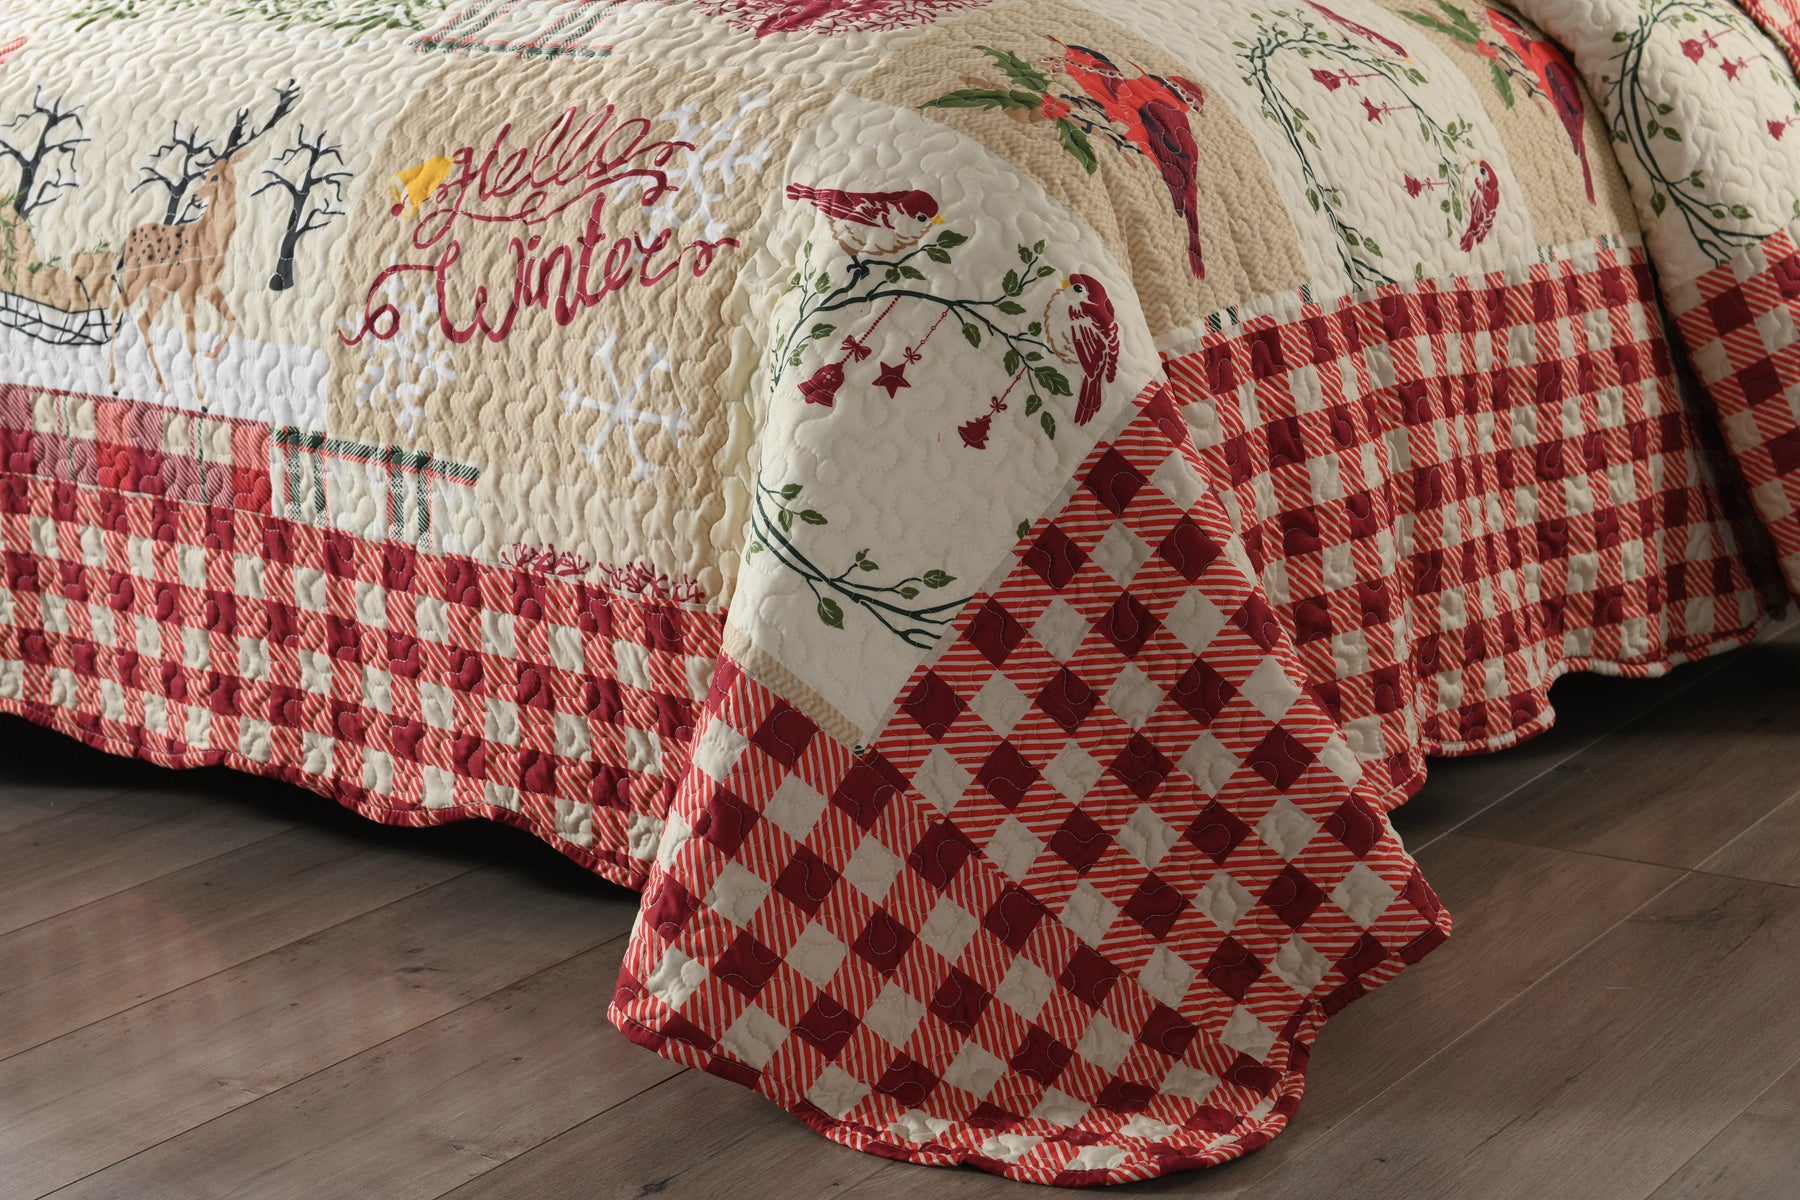 3 Pcs Christmas Quilt Bedspread Set Rustic Cabin Lodge Quilt BY010